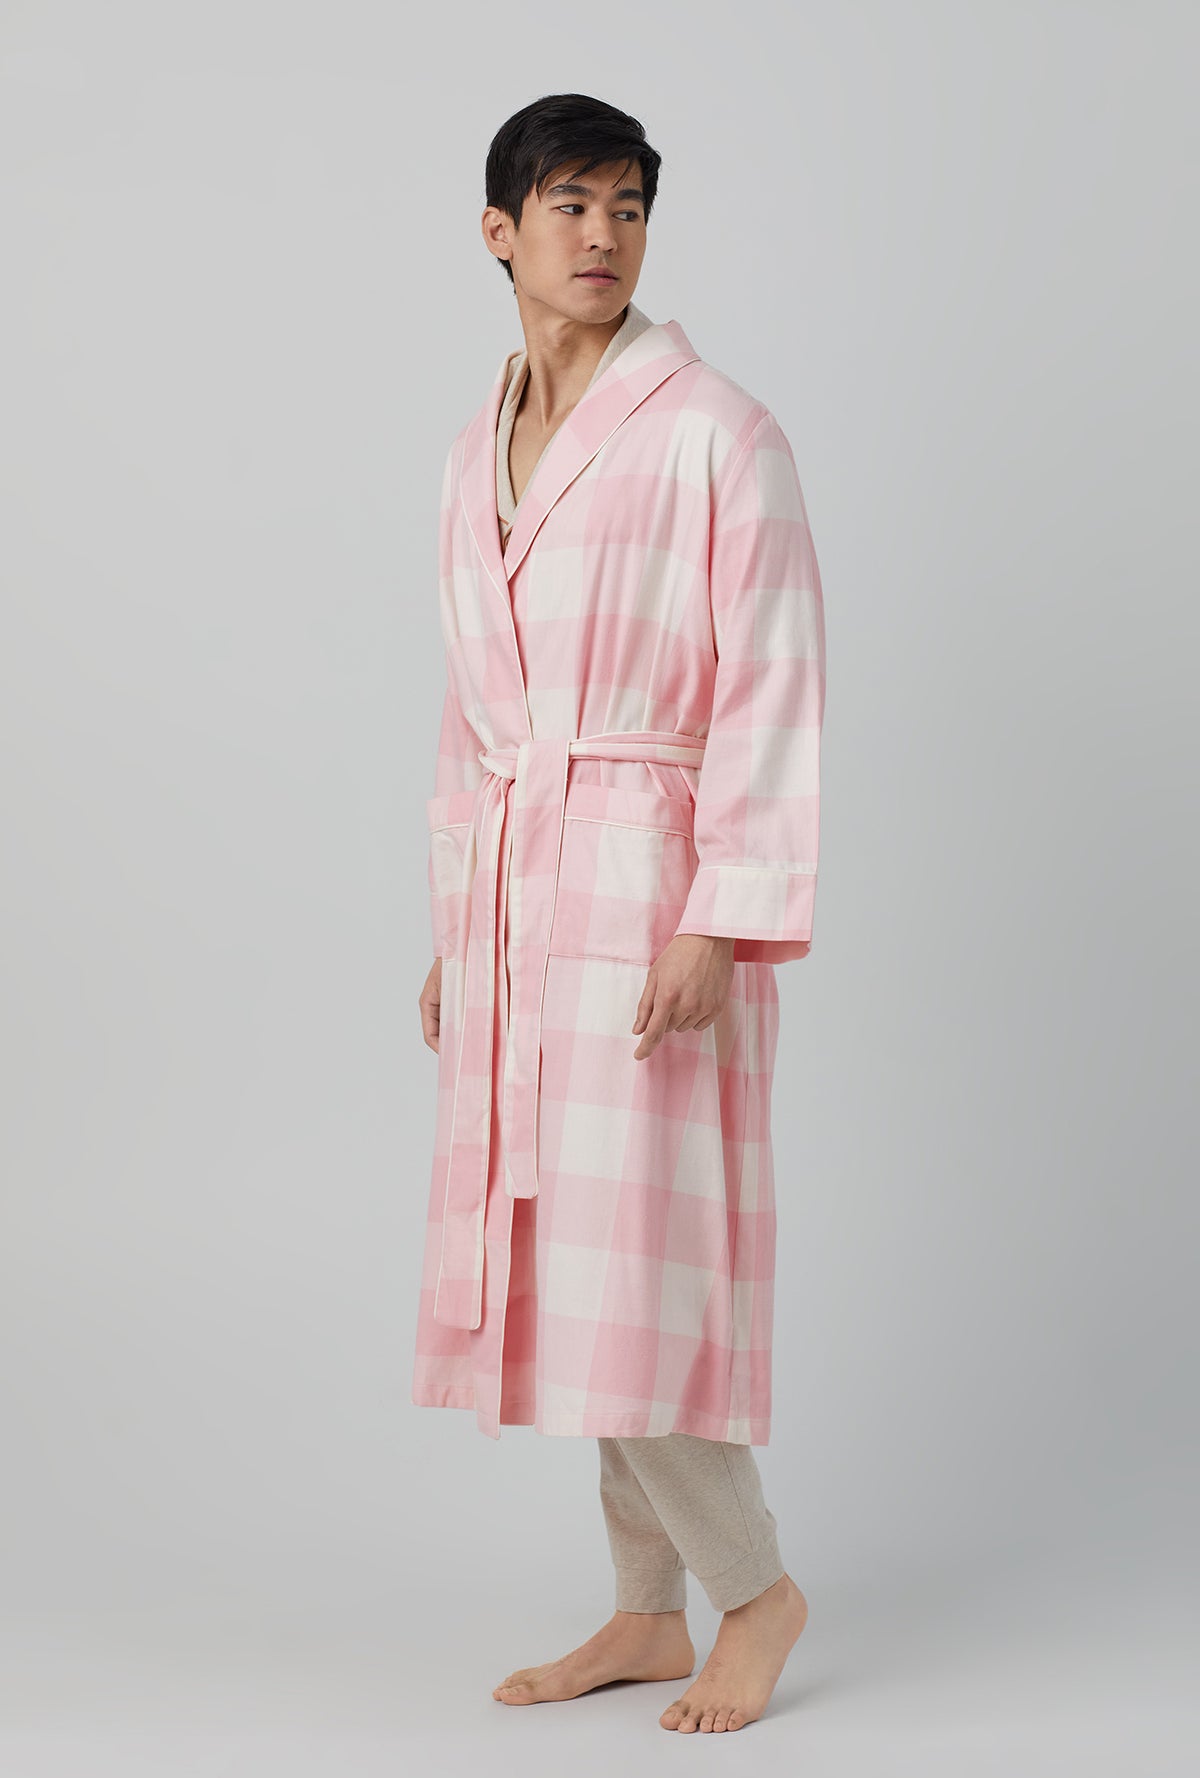 A man wearing classic woven cotton flannel robe with checking in print